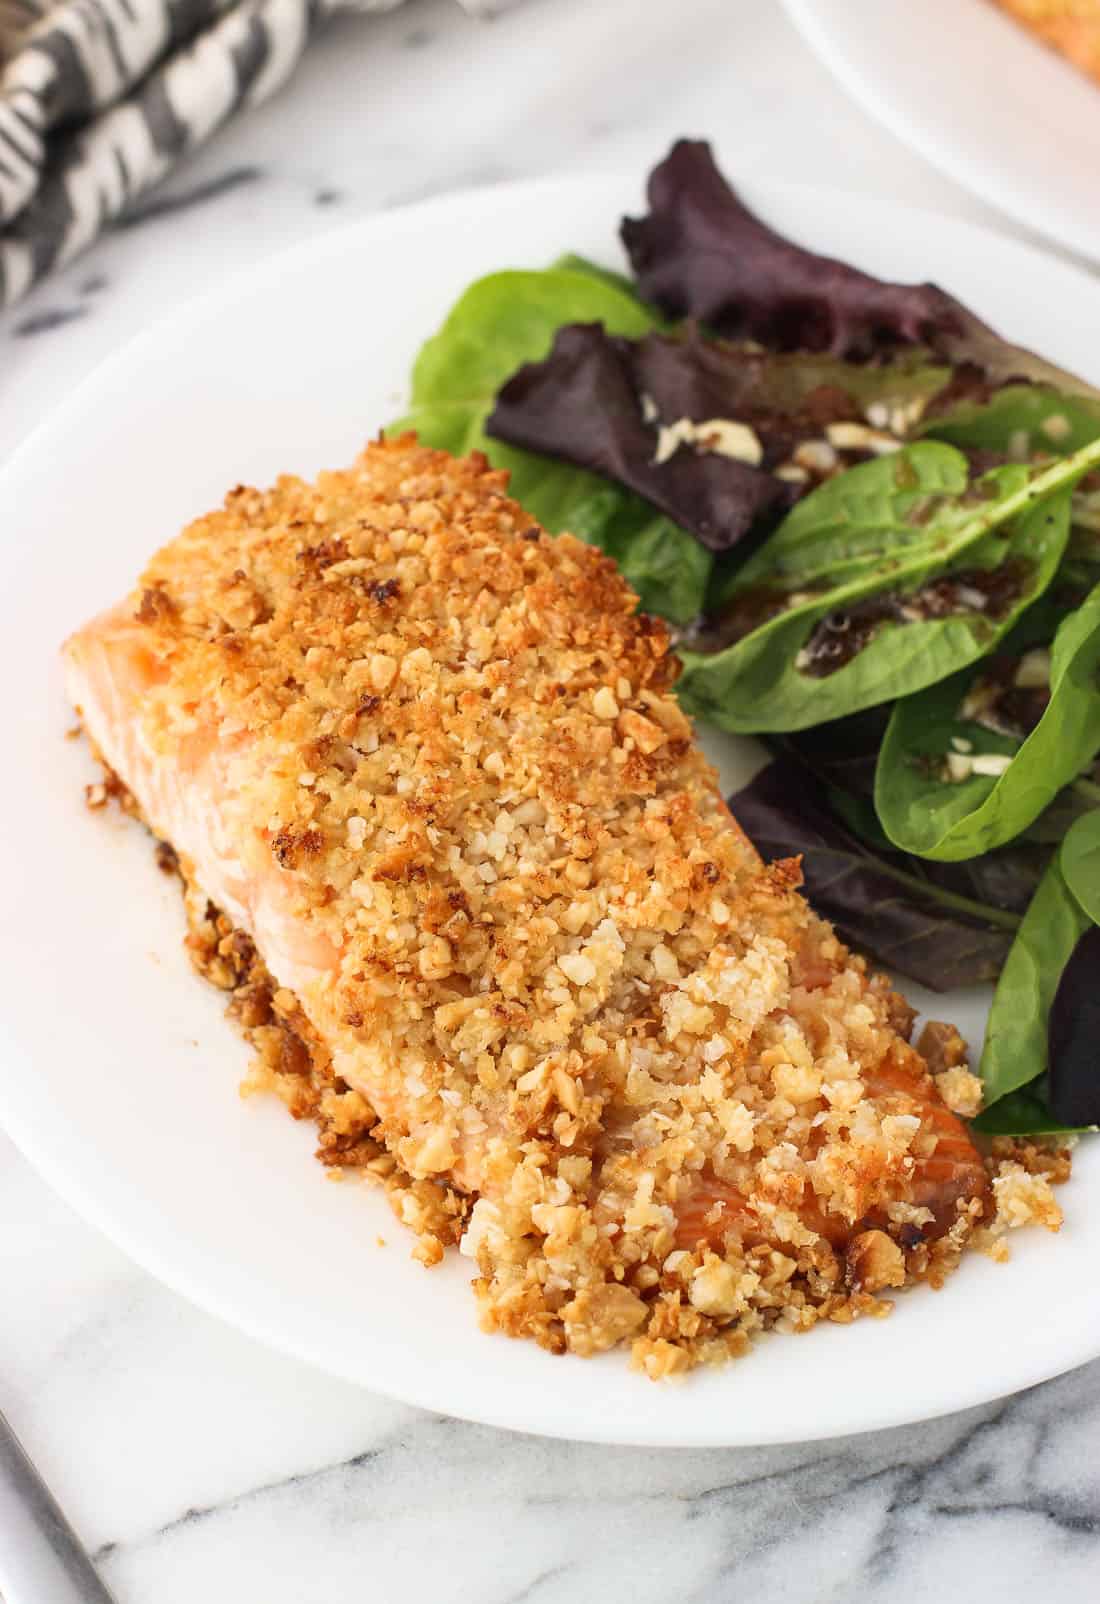 A fillet of coconut macadamia crusted salmon on a plate next to a side salad